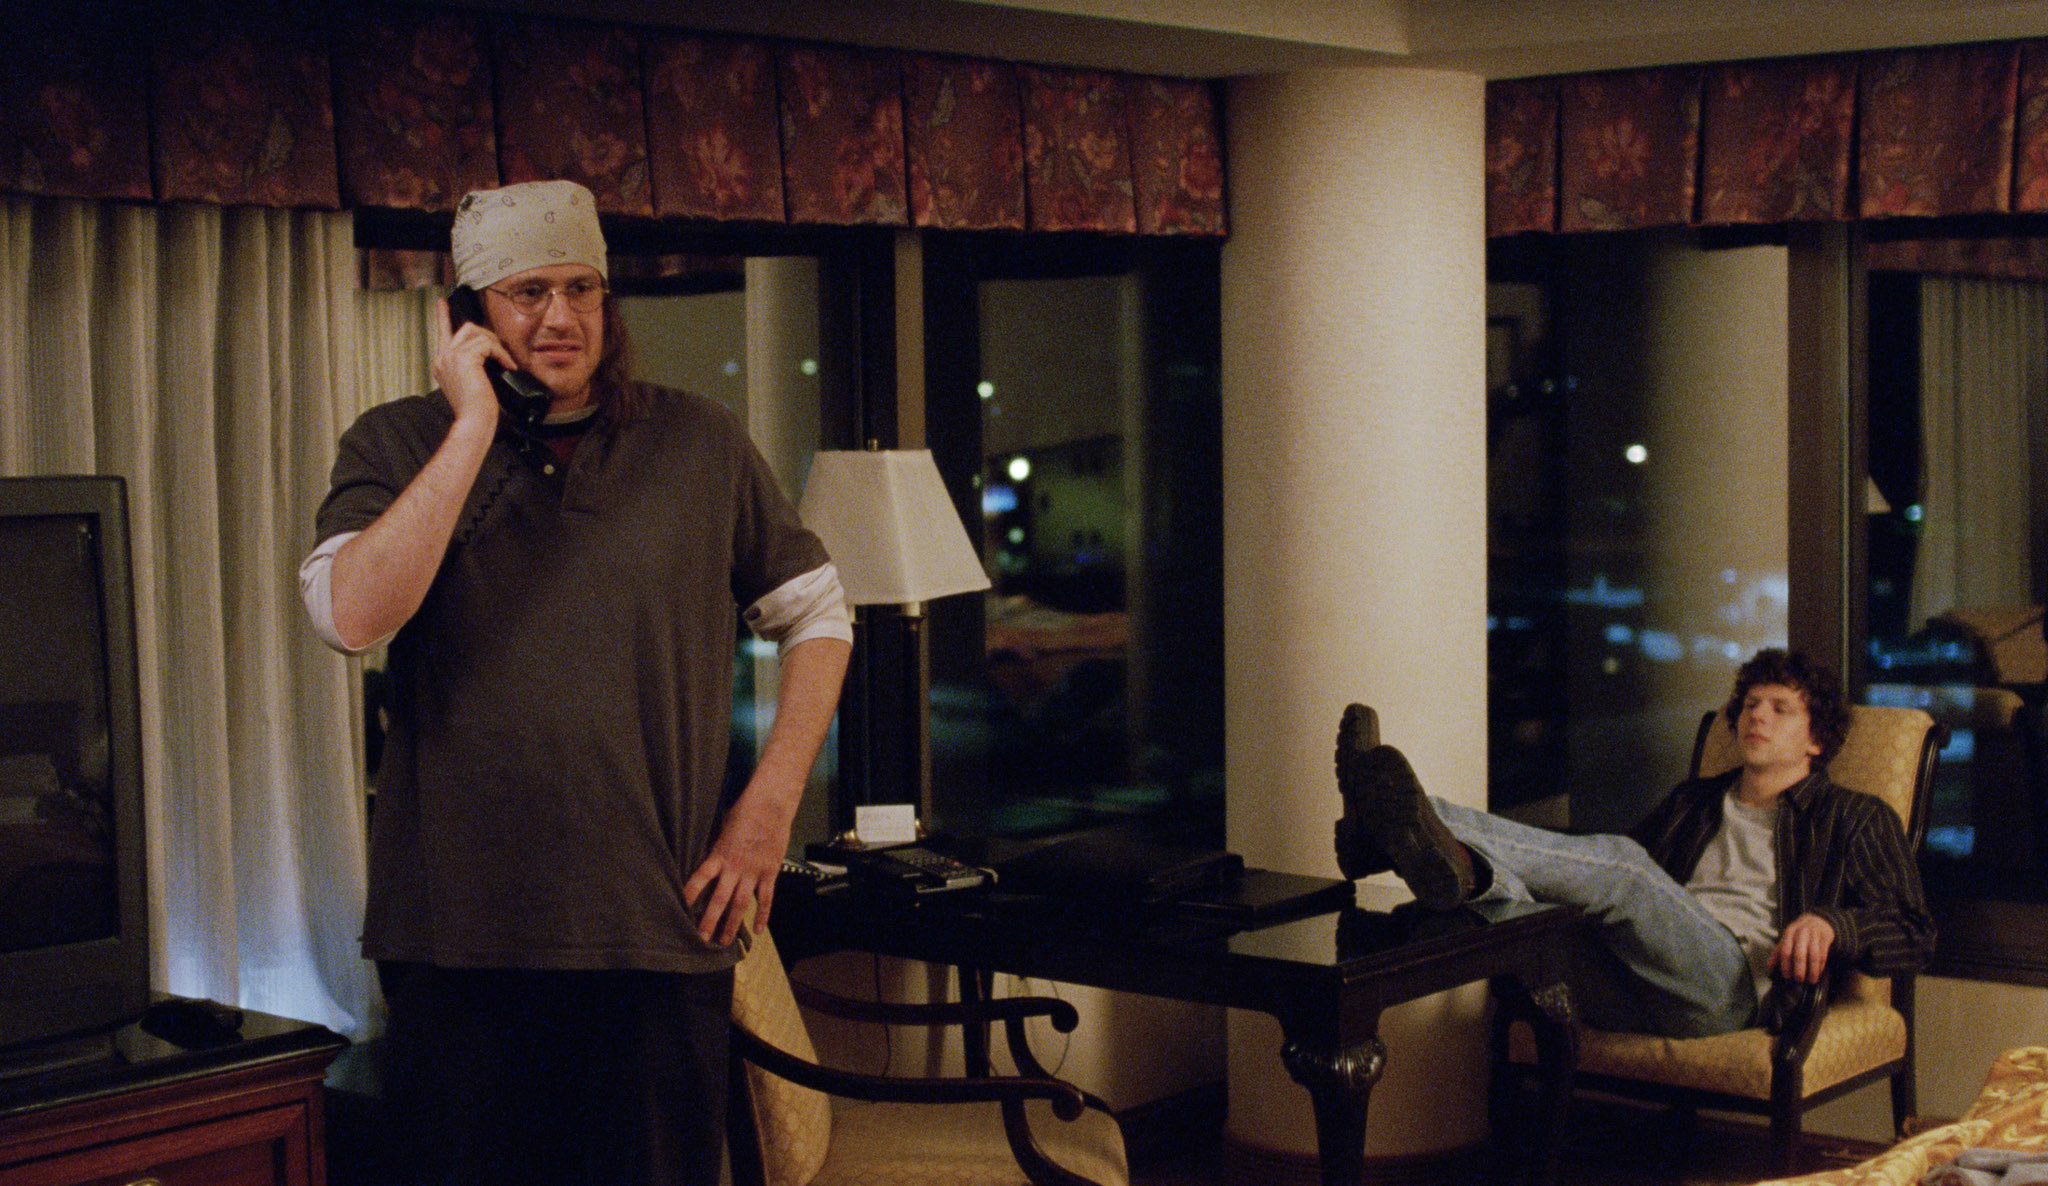 jason as david foster in a scene on the phone